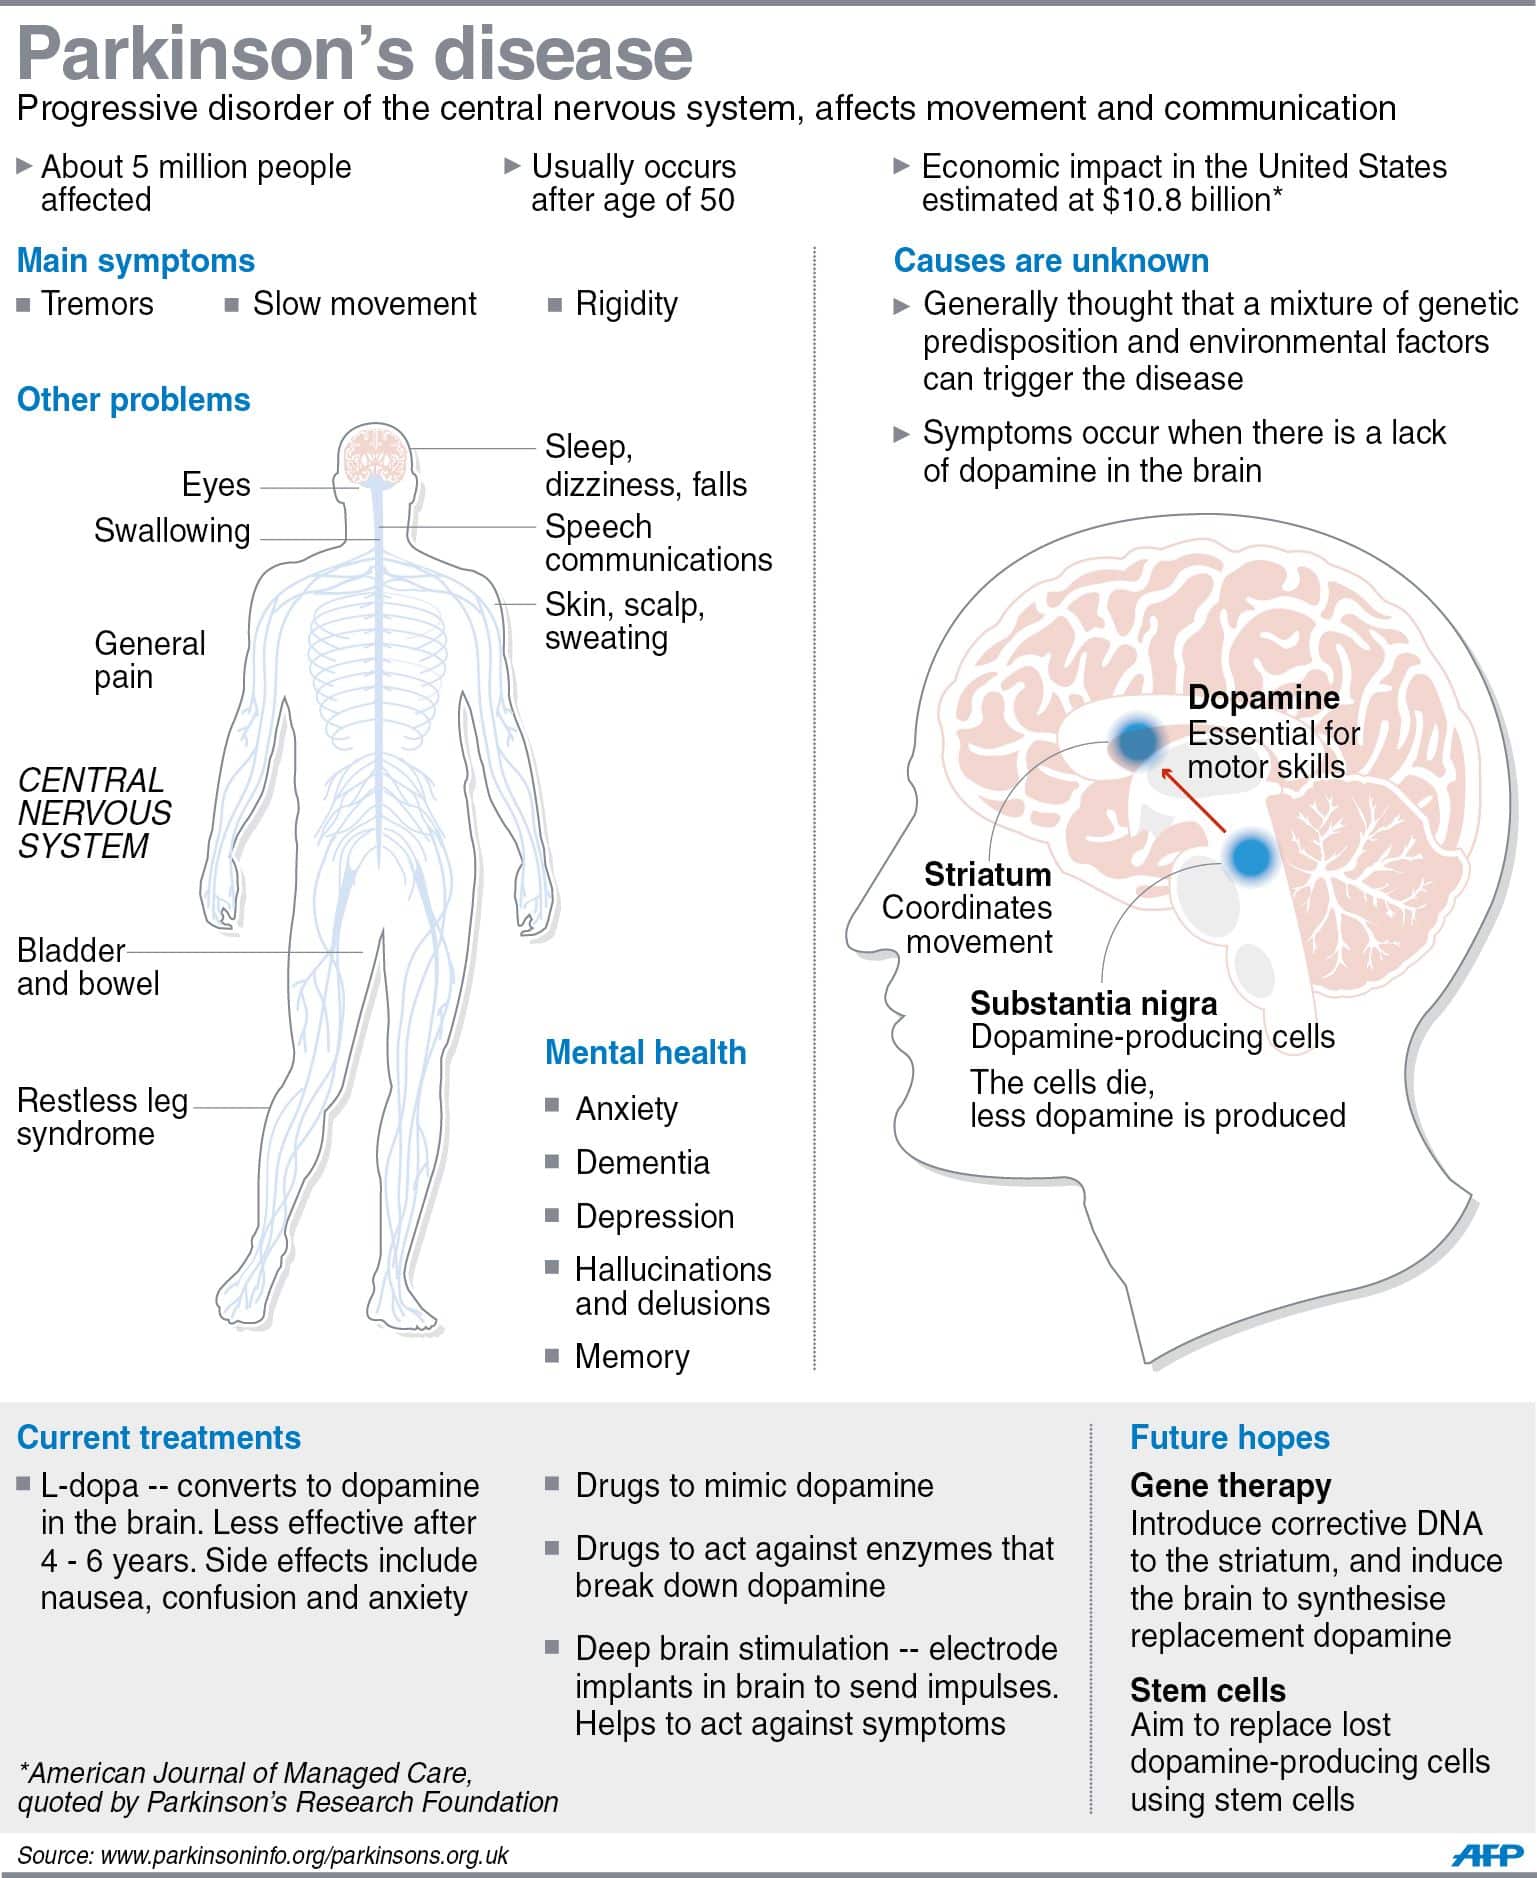 How To Assess For Parkinson